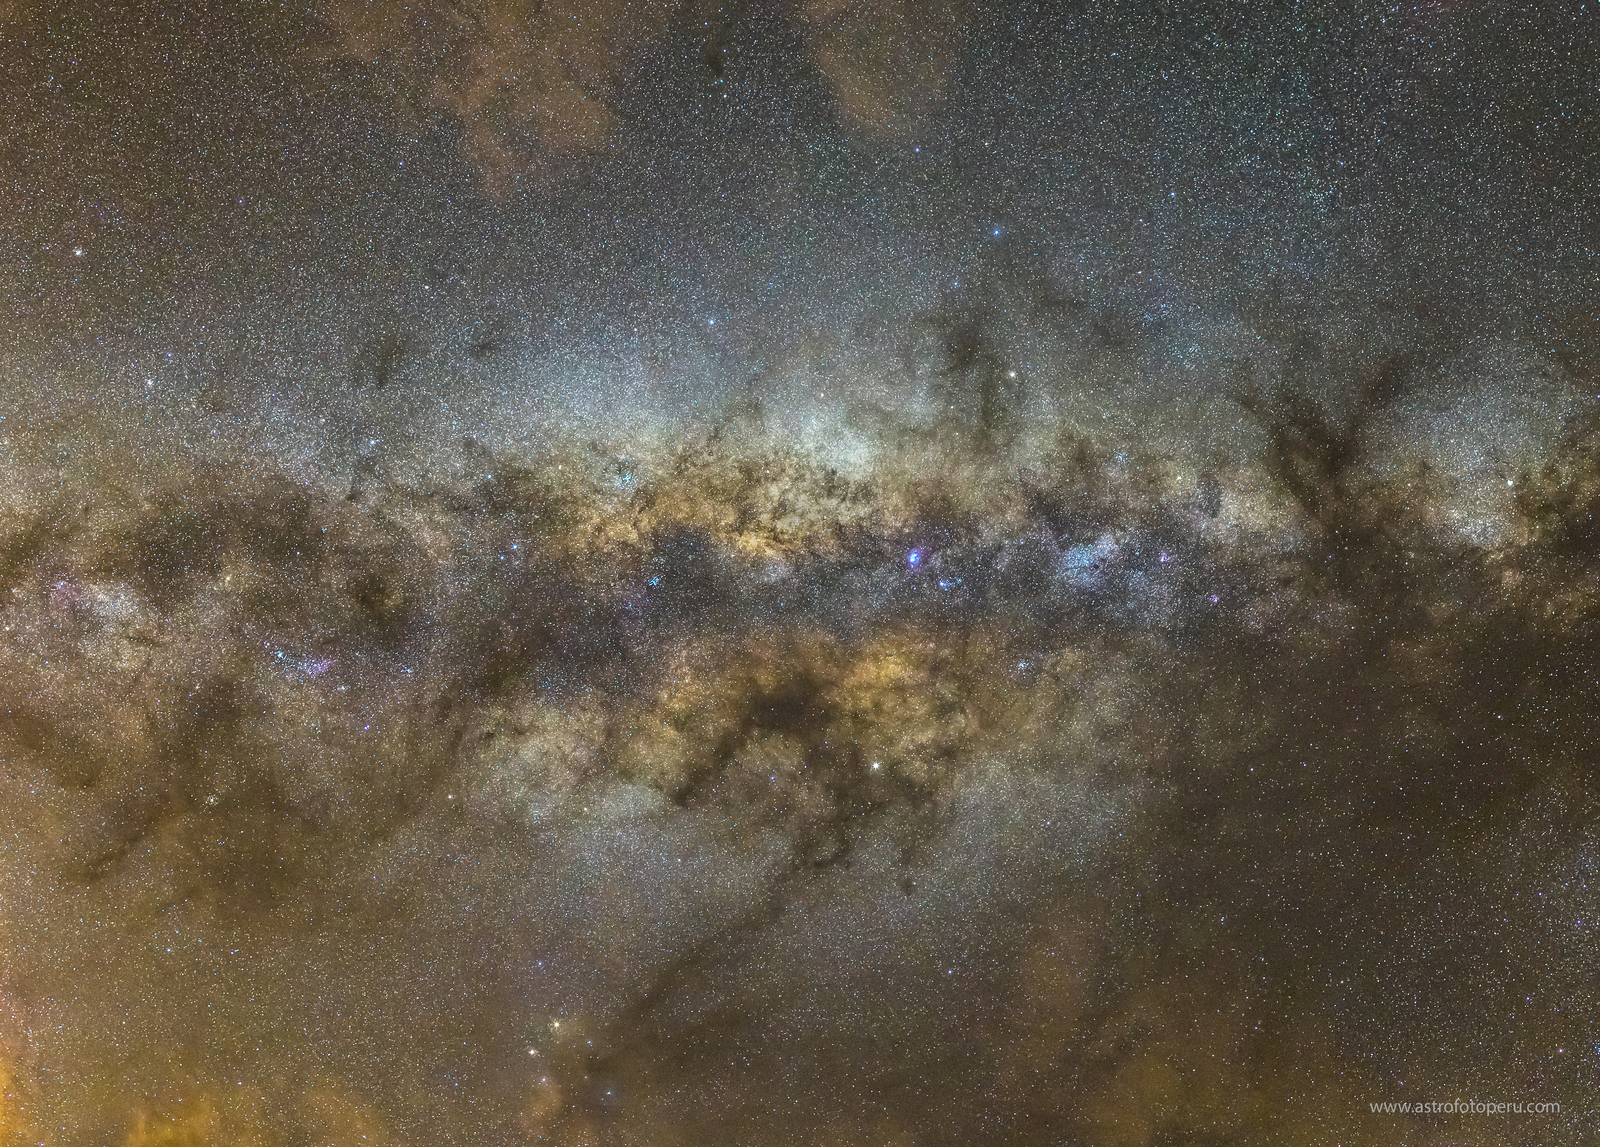 Exploring the Universe From Peruvian Skies